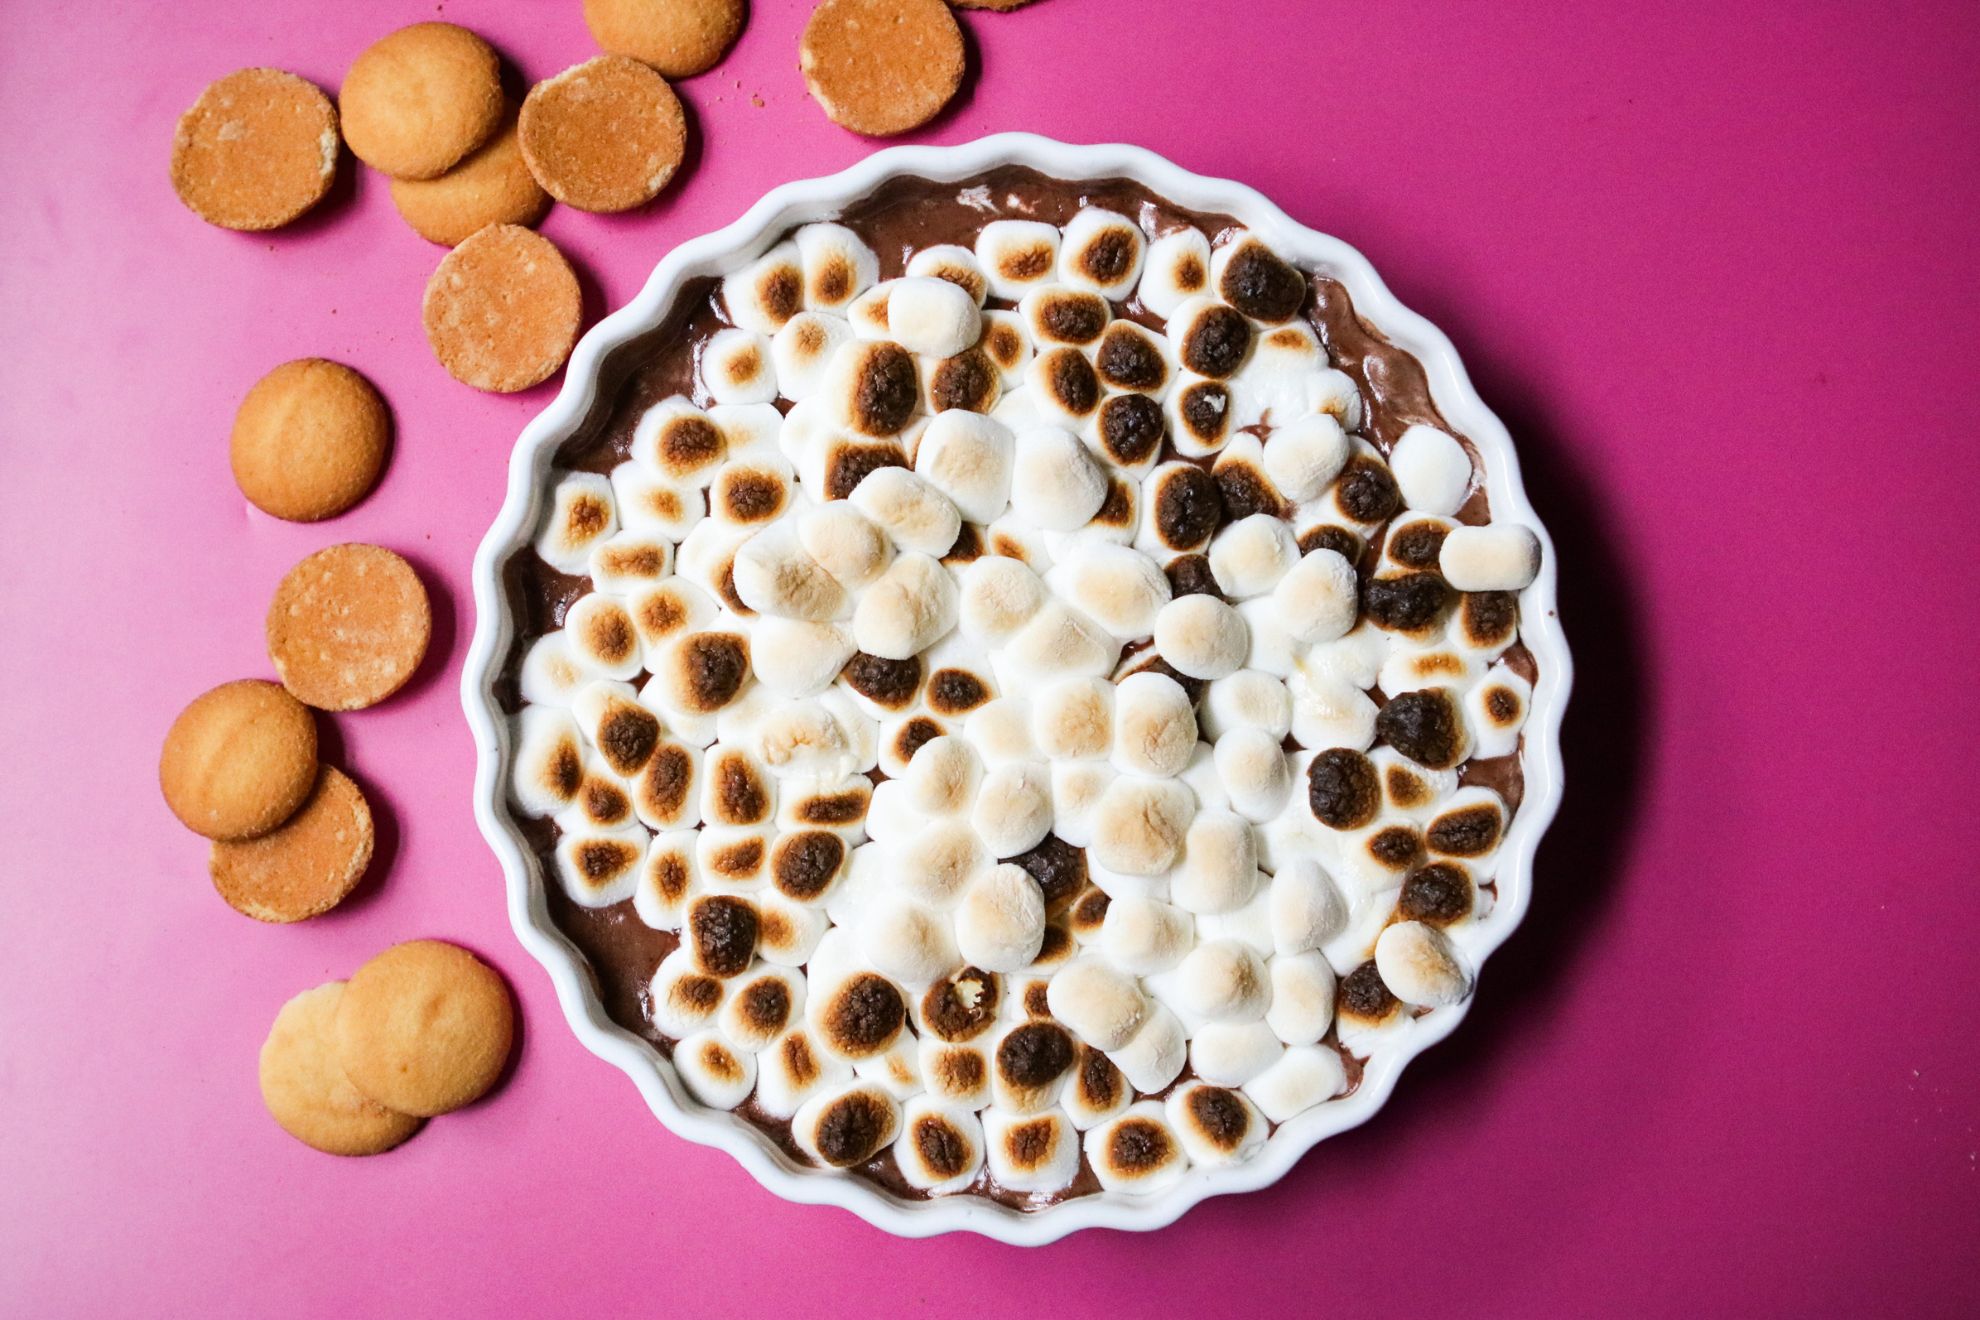 This is an overhead horizontal image of a white ceramic scalloped pie dish sitting on a deep pink surface. In the pie dish is a chocolate mousse spread out in an even layer across the bottom of the dish and topped with toasted mini marshmallows. Nilla wafer cookies are on the pink surface to the left of the pie dish.